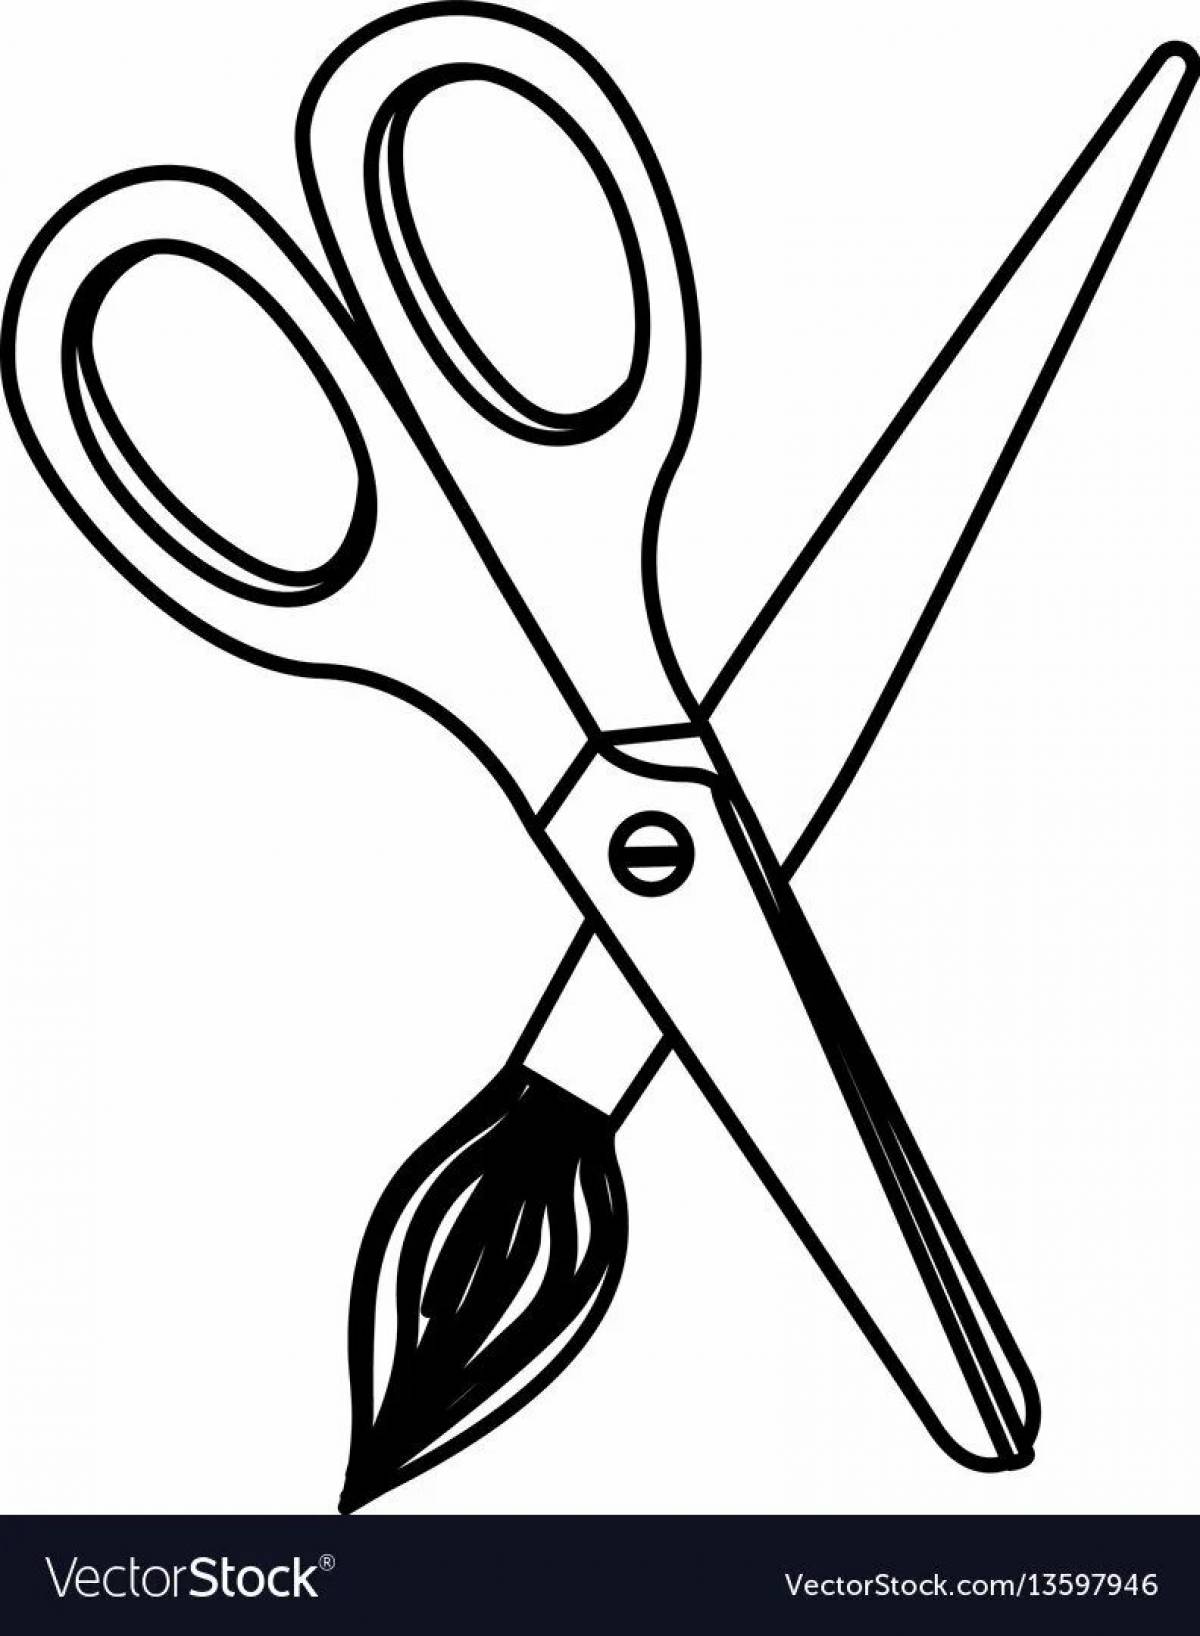 Gorgeous scissors coloring book for kids